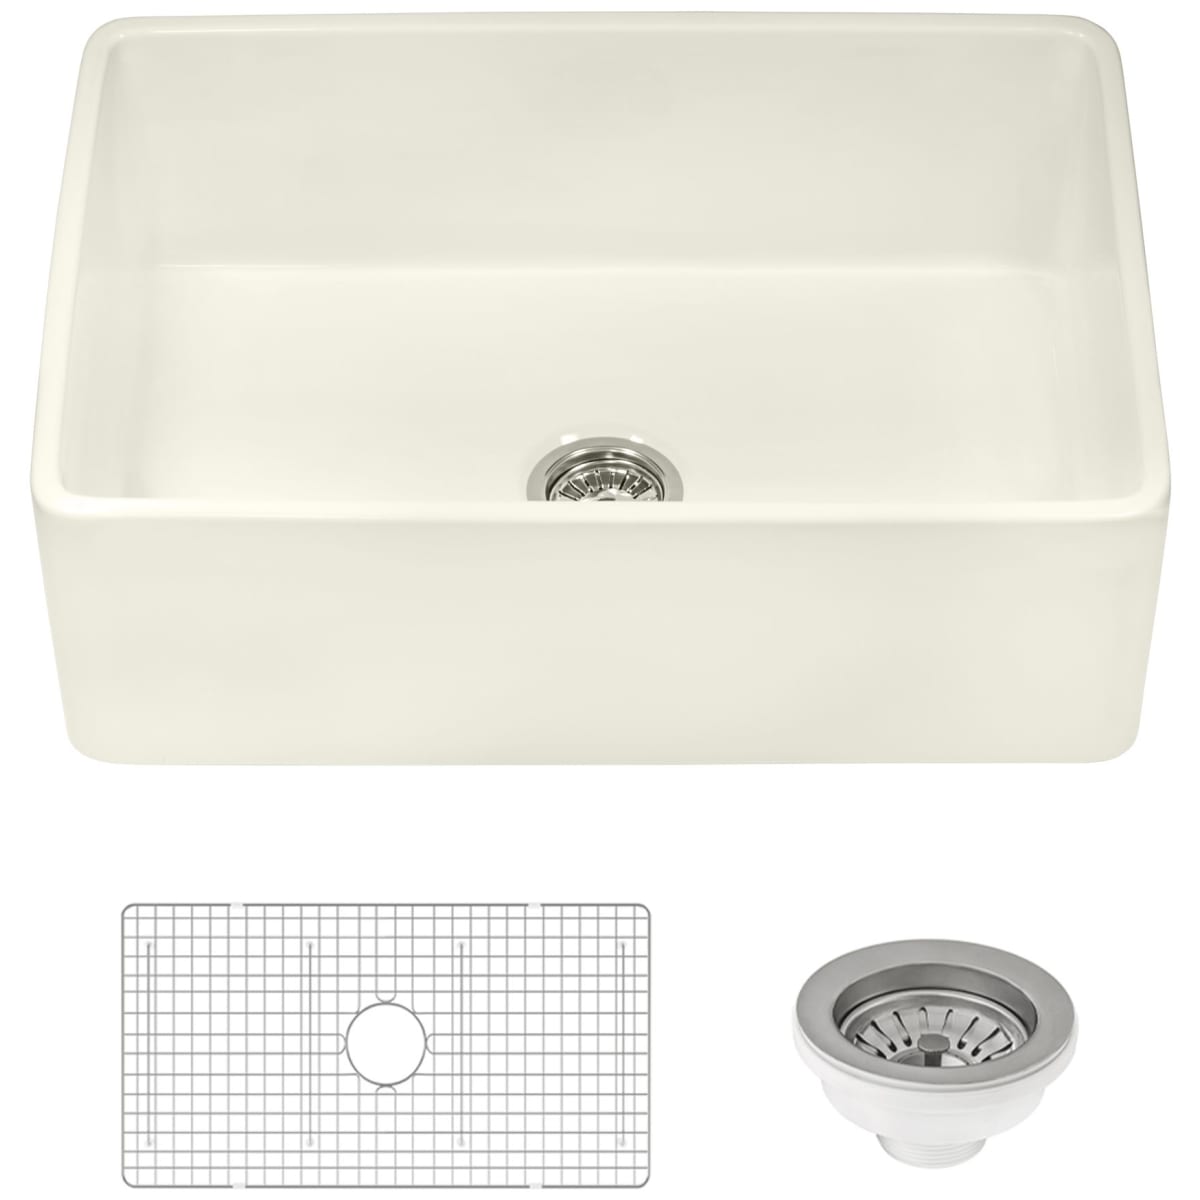 30 Inch Fireclay Kitchen Sink with Cutting Board - White